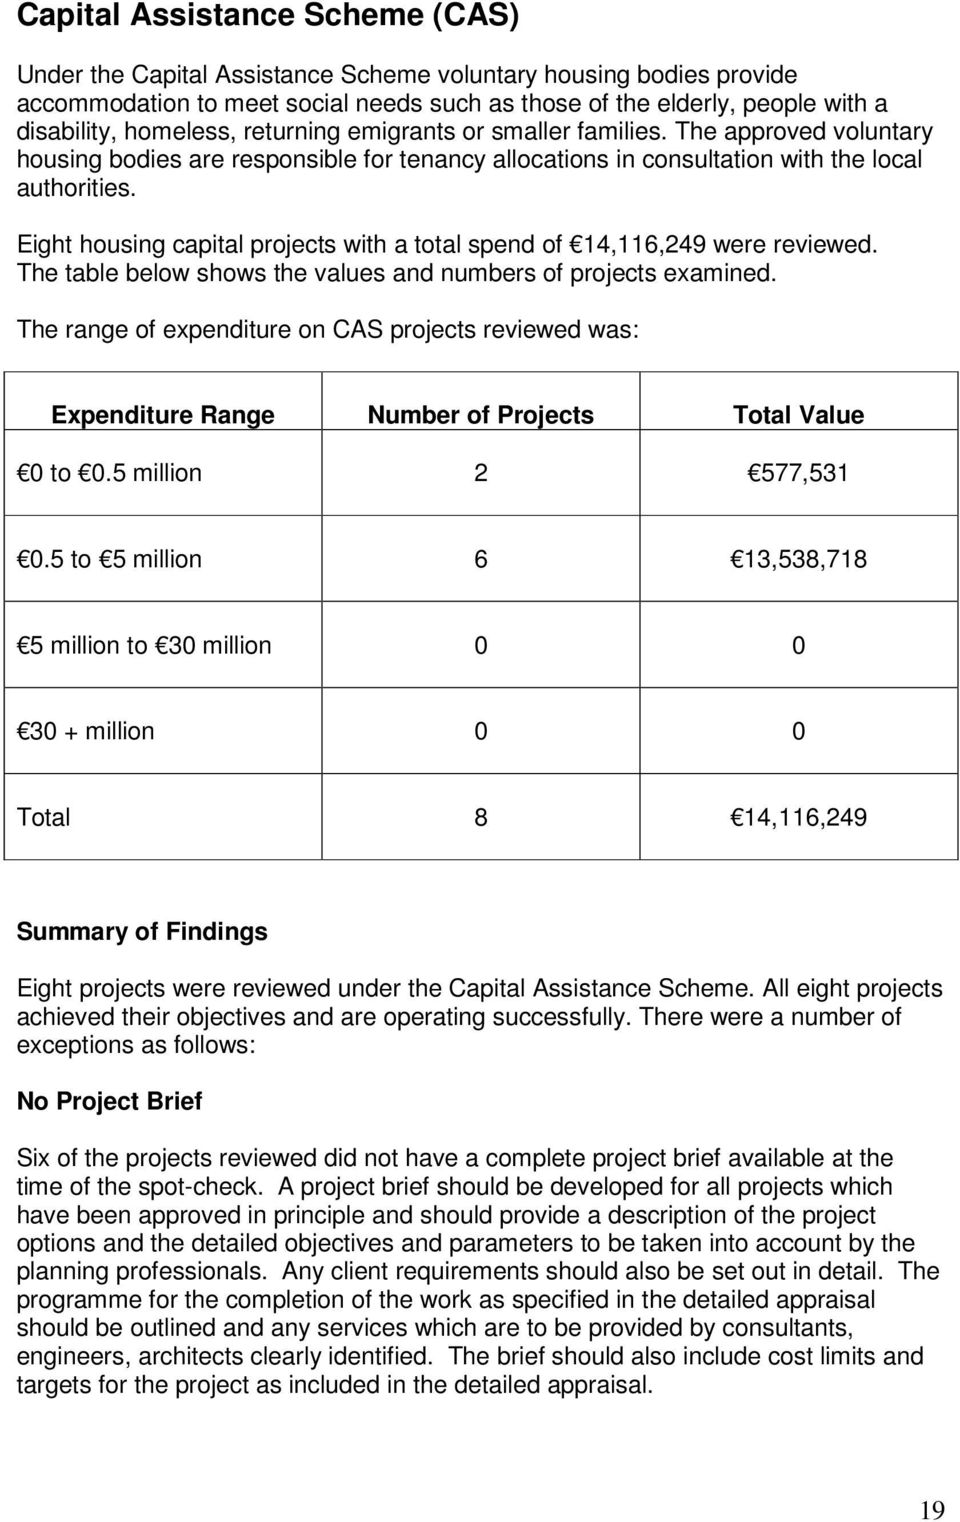 Eight housing capital projects with a total spend of 14,116,249 were reviewed. The table below shows the values and numbers of projects examined.